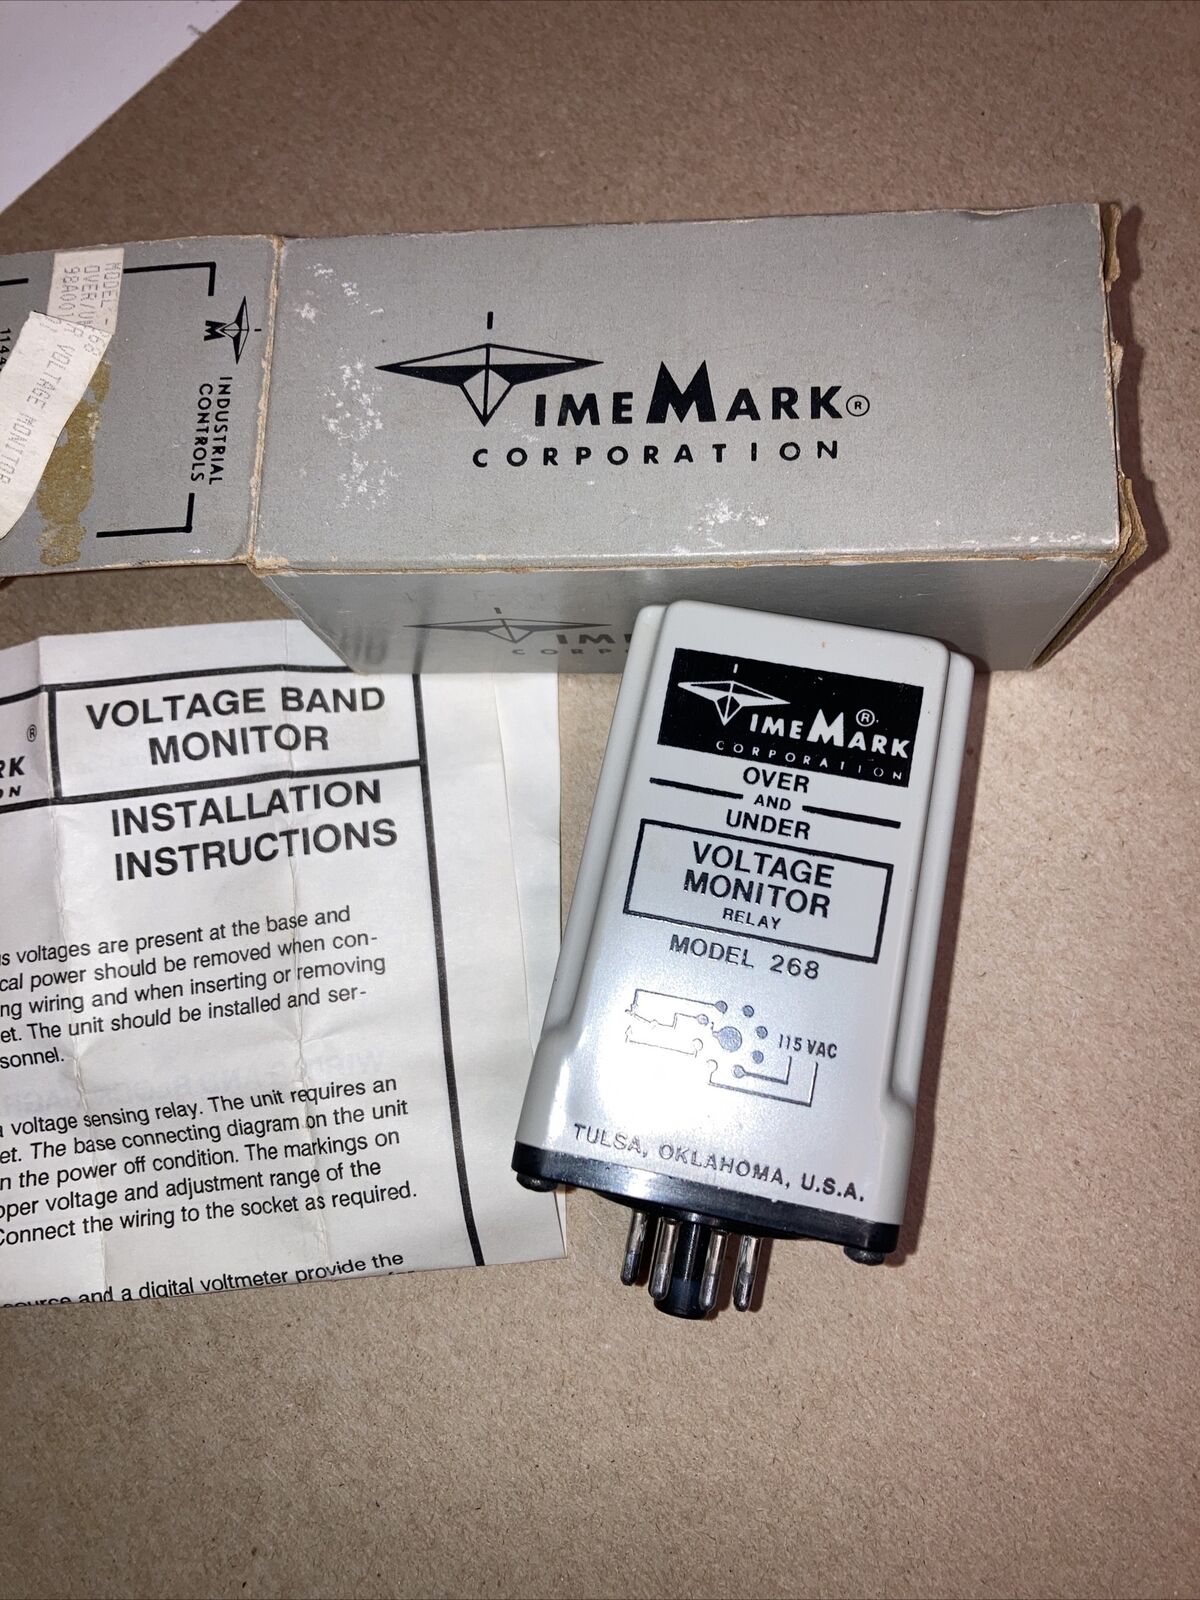 TIMEMARK OVER and UNDER VOLTAGE MONITOR RELAY MODEL 268 - NOS IN BOX